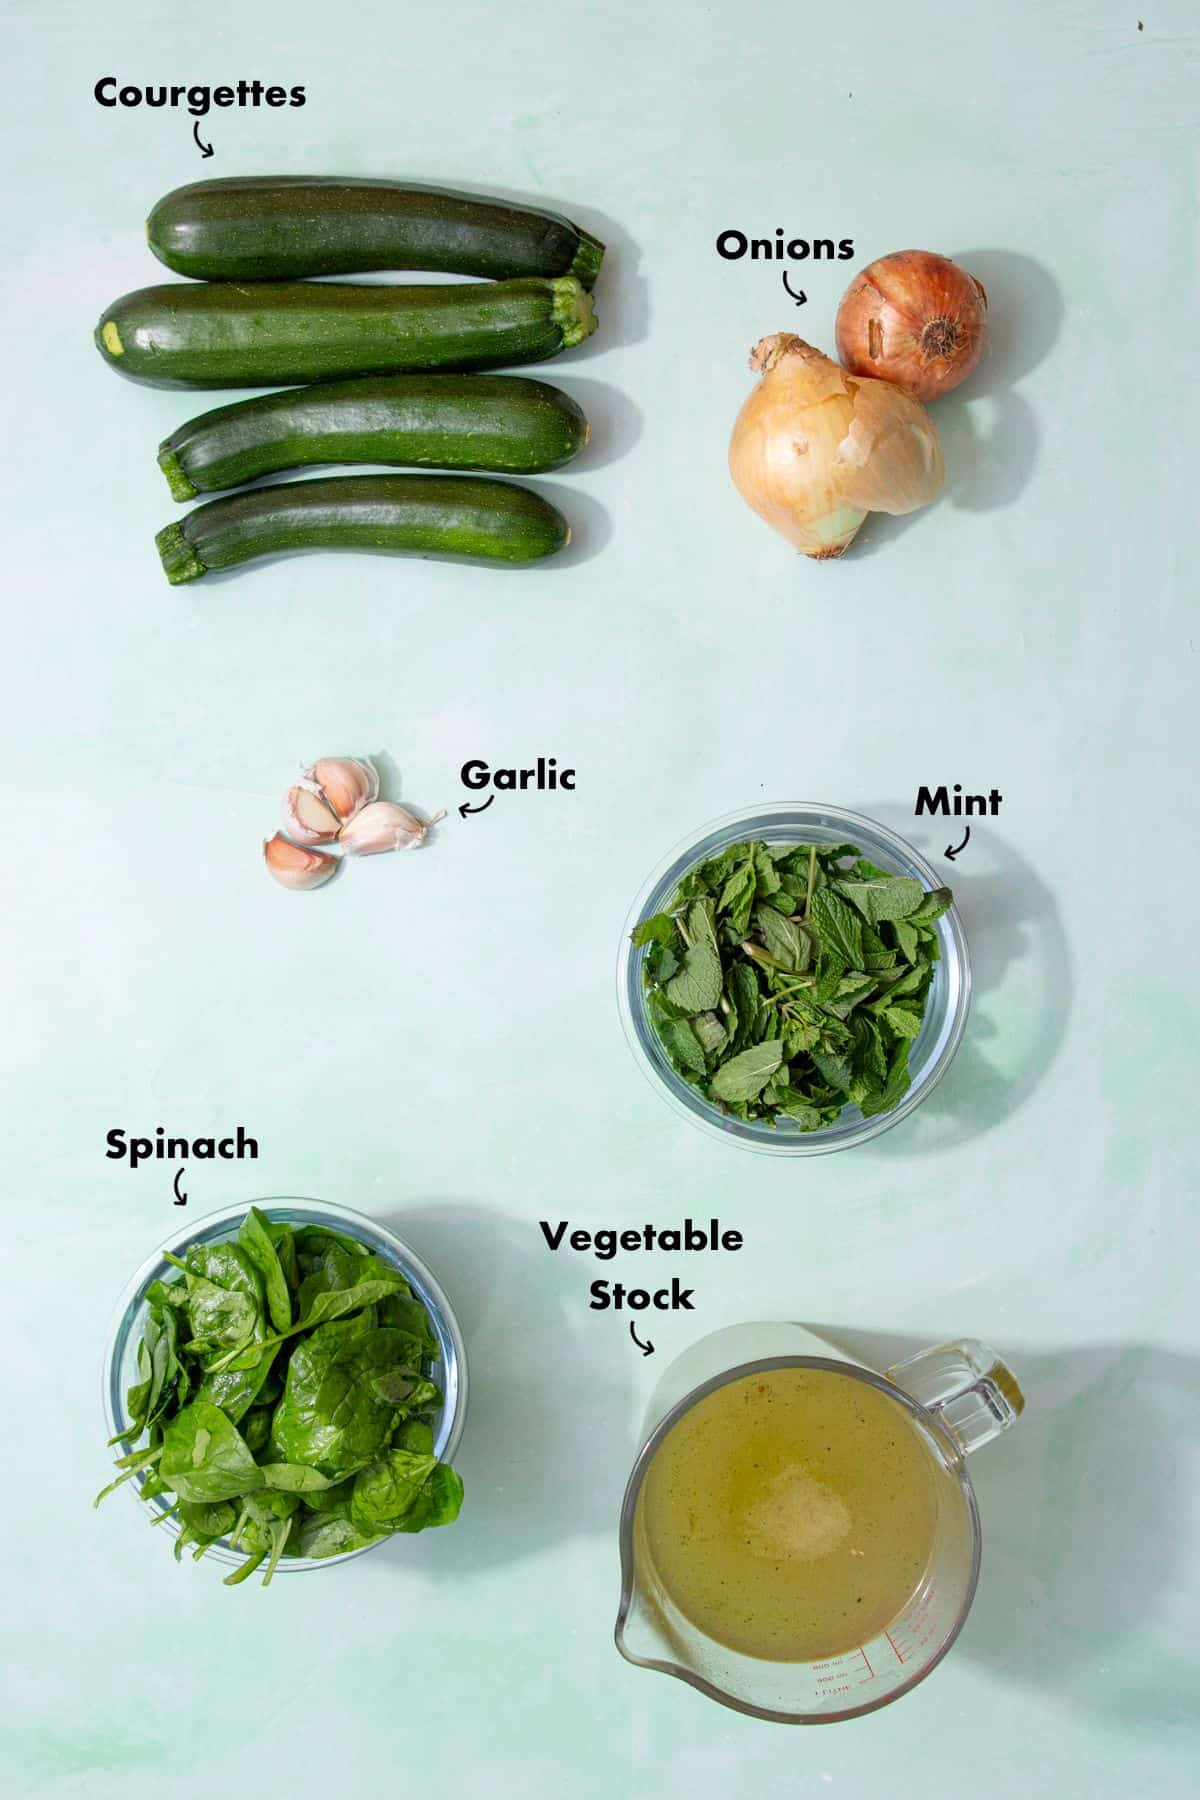 Ingredients to make courgette soup laid out on a pale blue background and labelled.